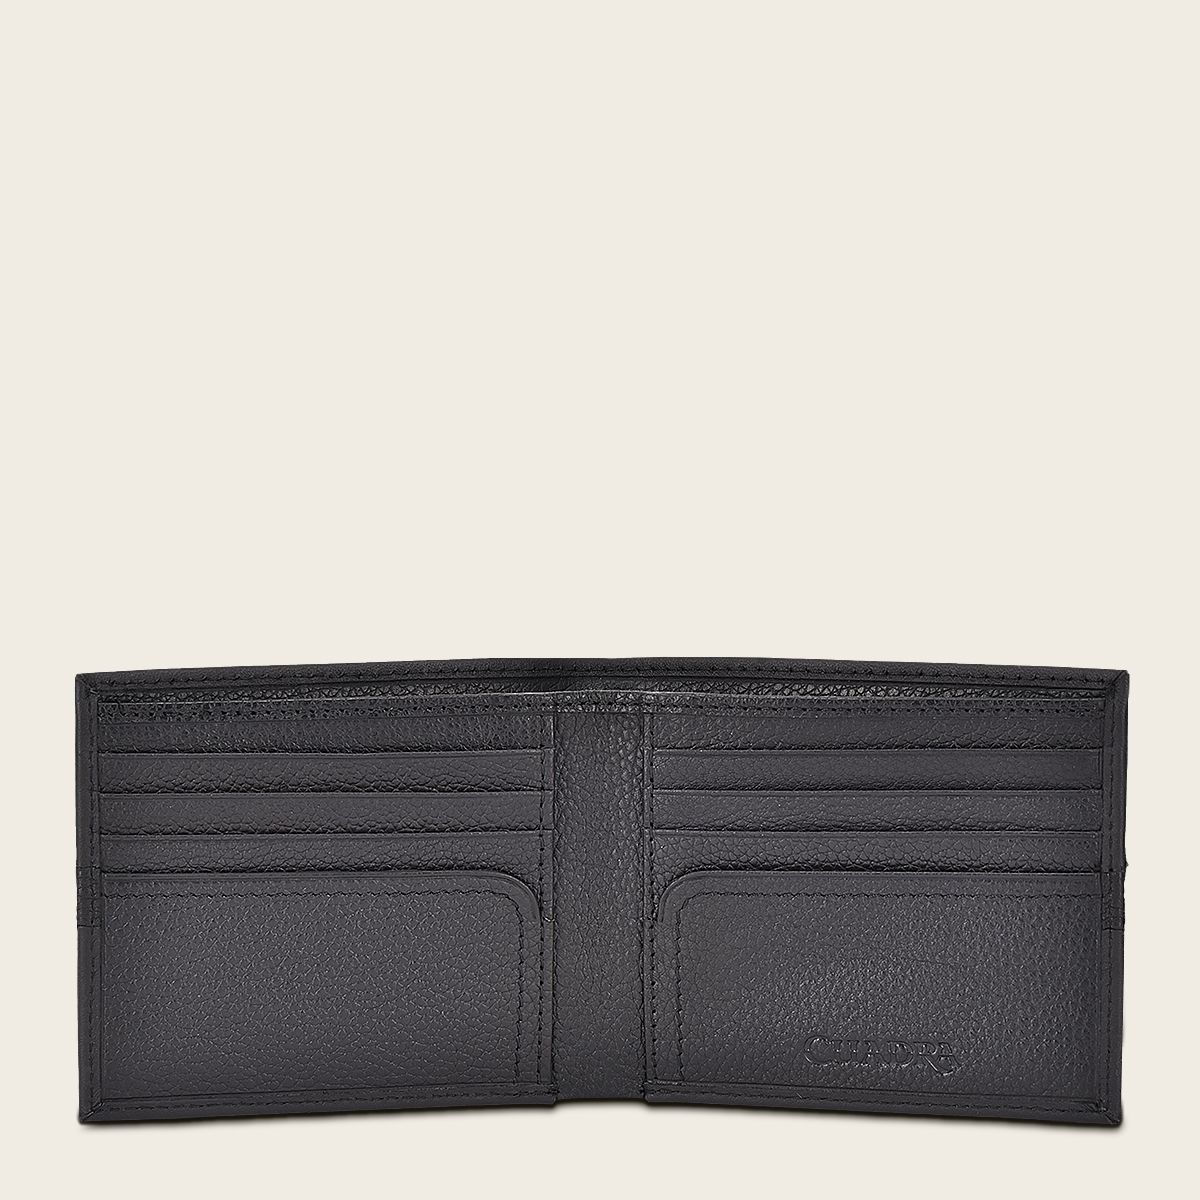 Black bovine leather wallet with contrasting leather strap